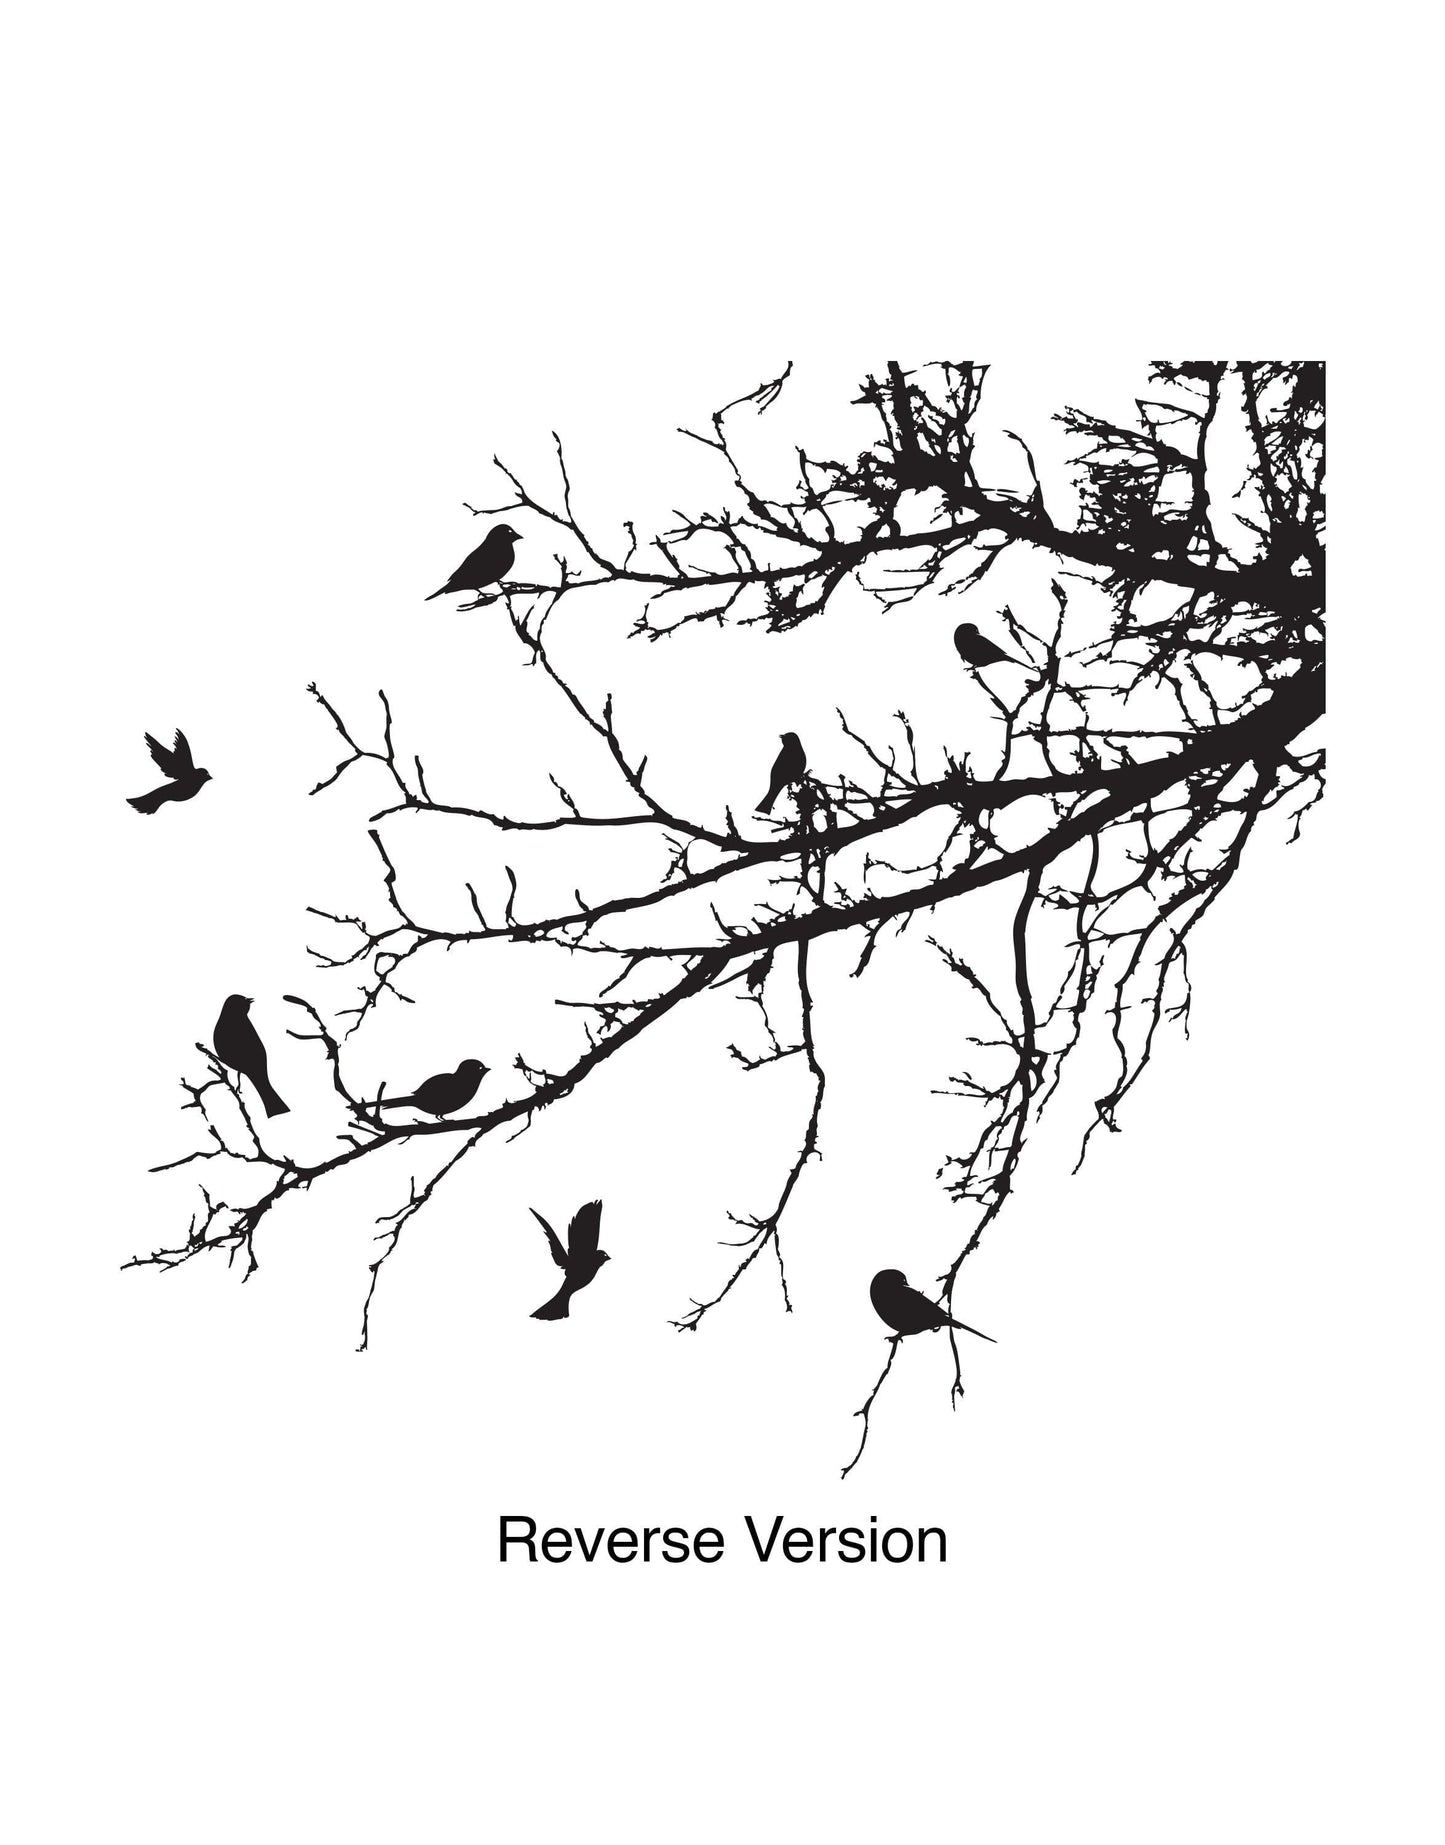 Black decal of 8 birds on tree branches on a white background.